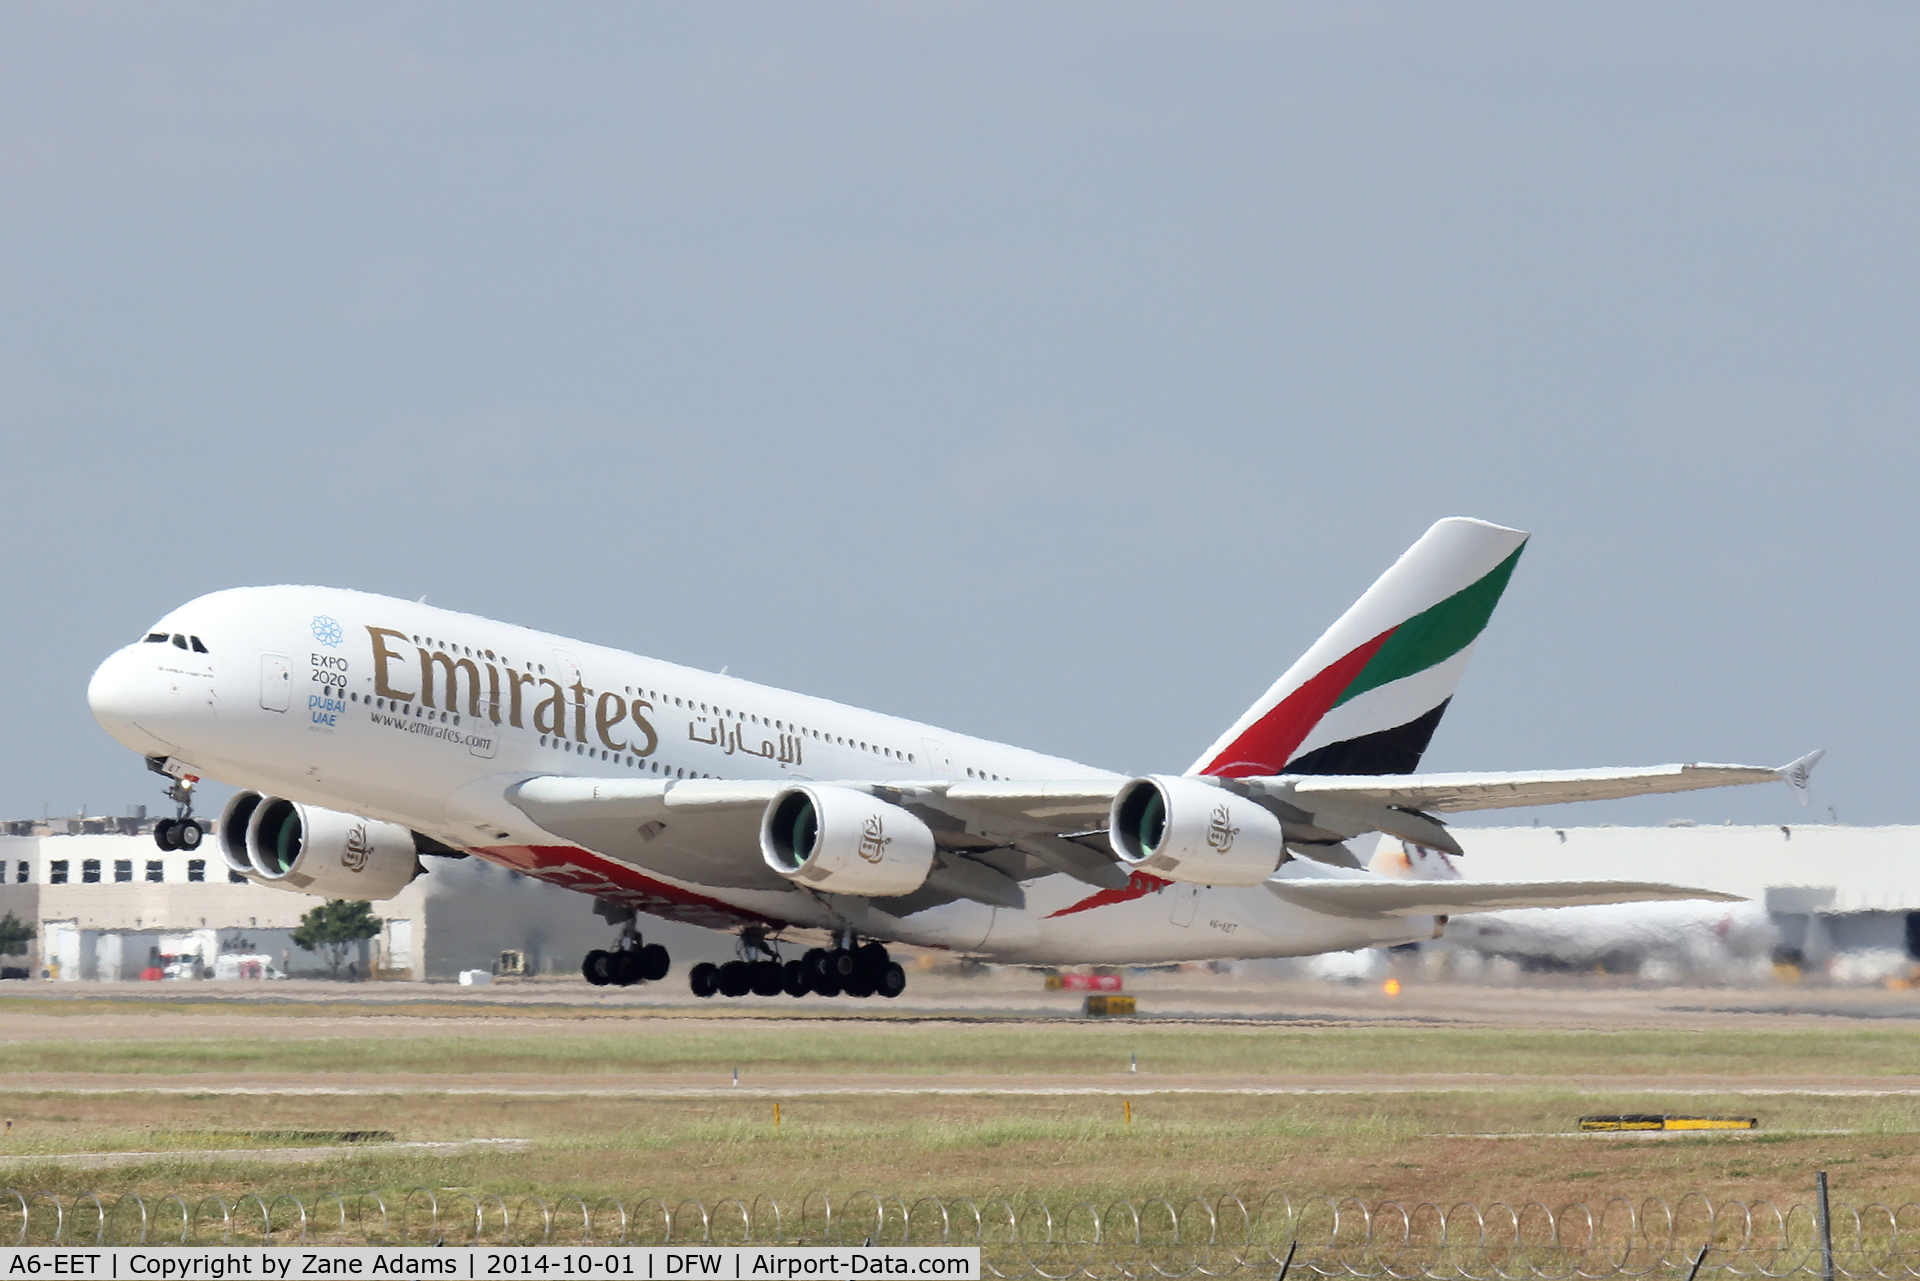 A6-EET, 2013 Airbus A380-861 C/N 142, Departing DFW Airport